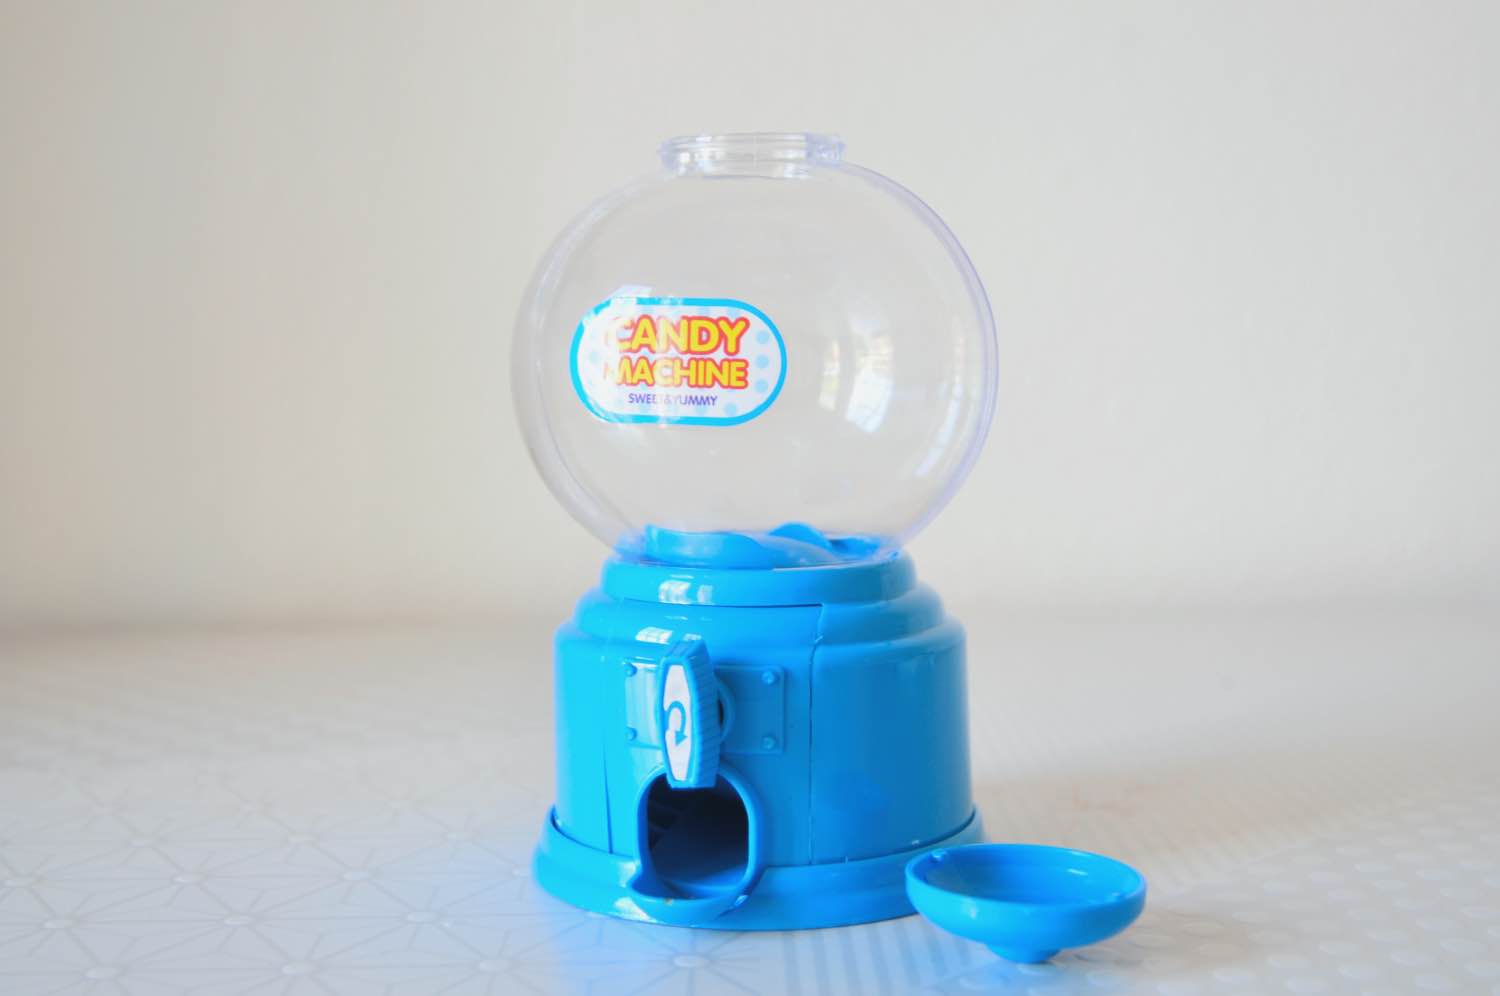 open the gumball machine to make a snow globe